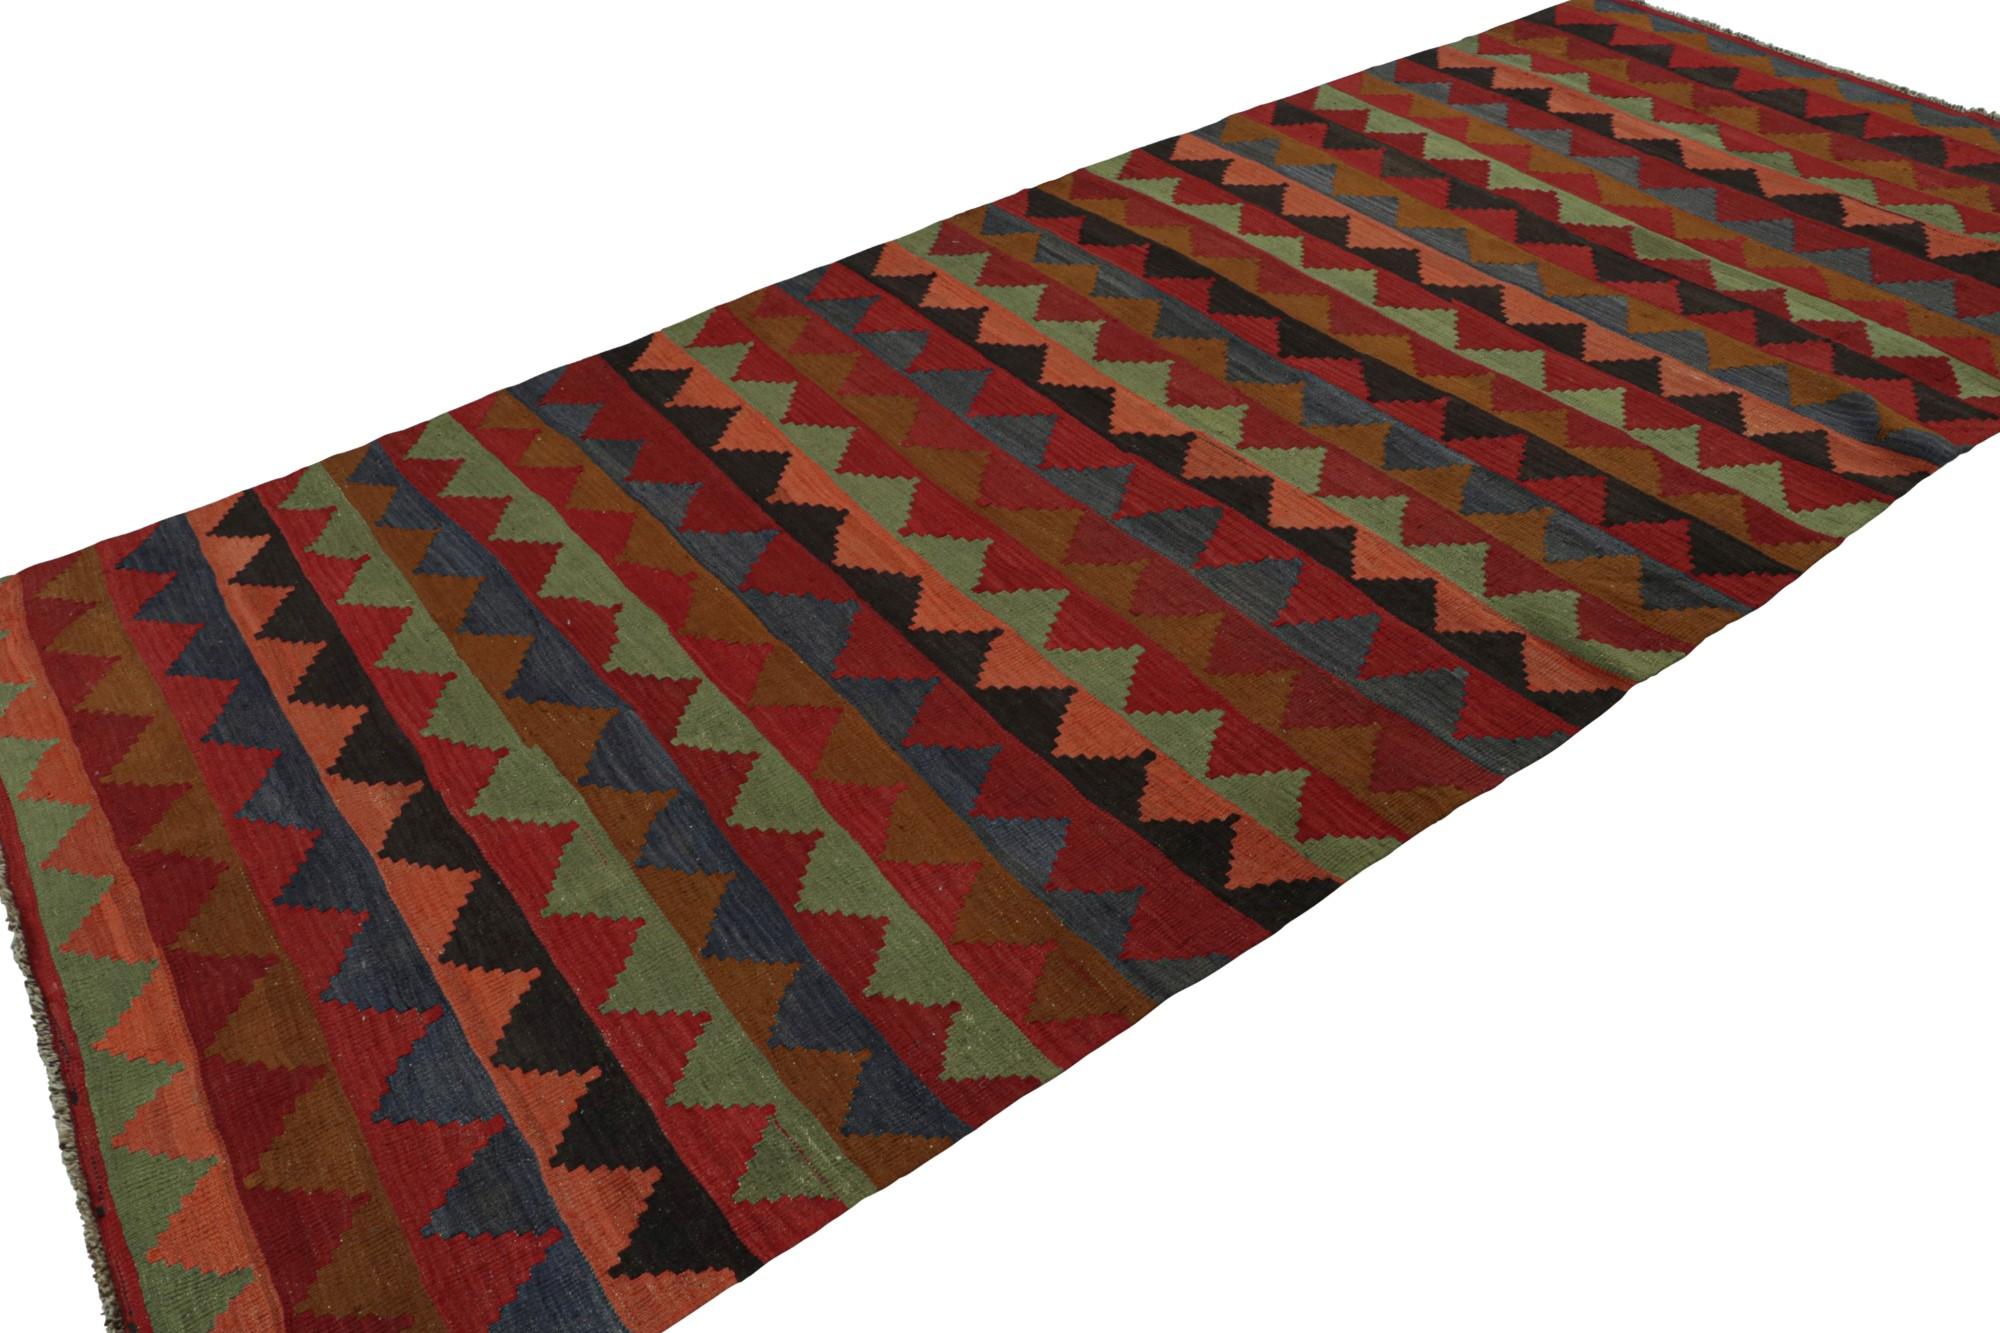 Handwoven in wool circa 1950-1960, this 6x13 vintage Afghani Kilim is a new curation from Rug & Kilim’s primitivist flatweaves. 

On the Design:

Specifically believed to originate from an Afghani tribe, this gallery runner boasts polychromatic